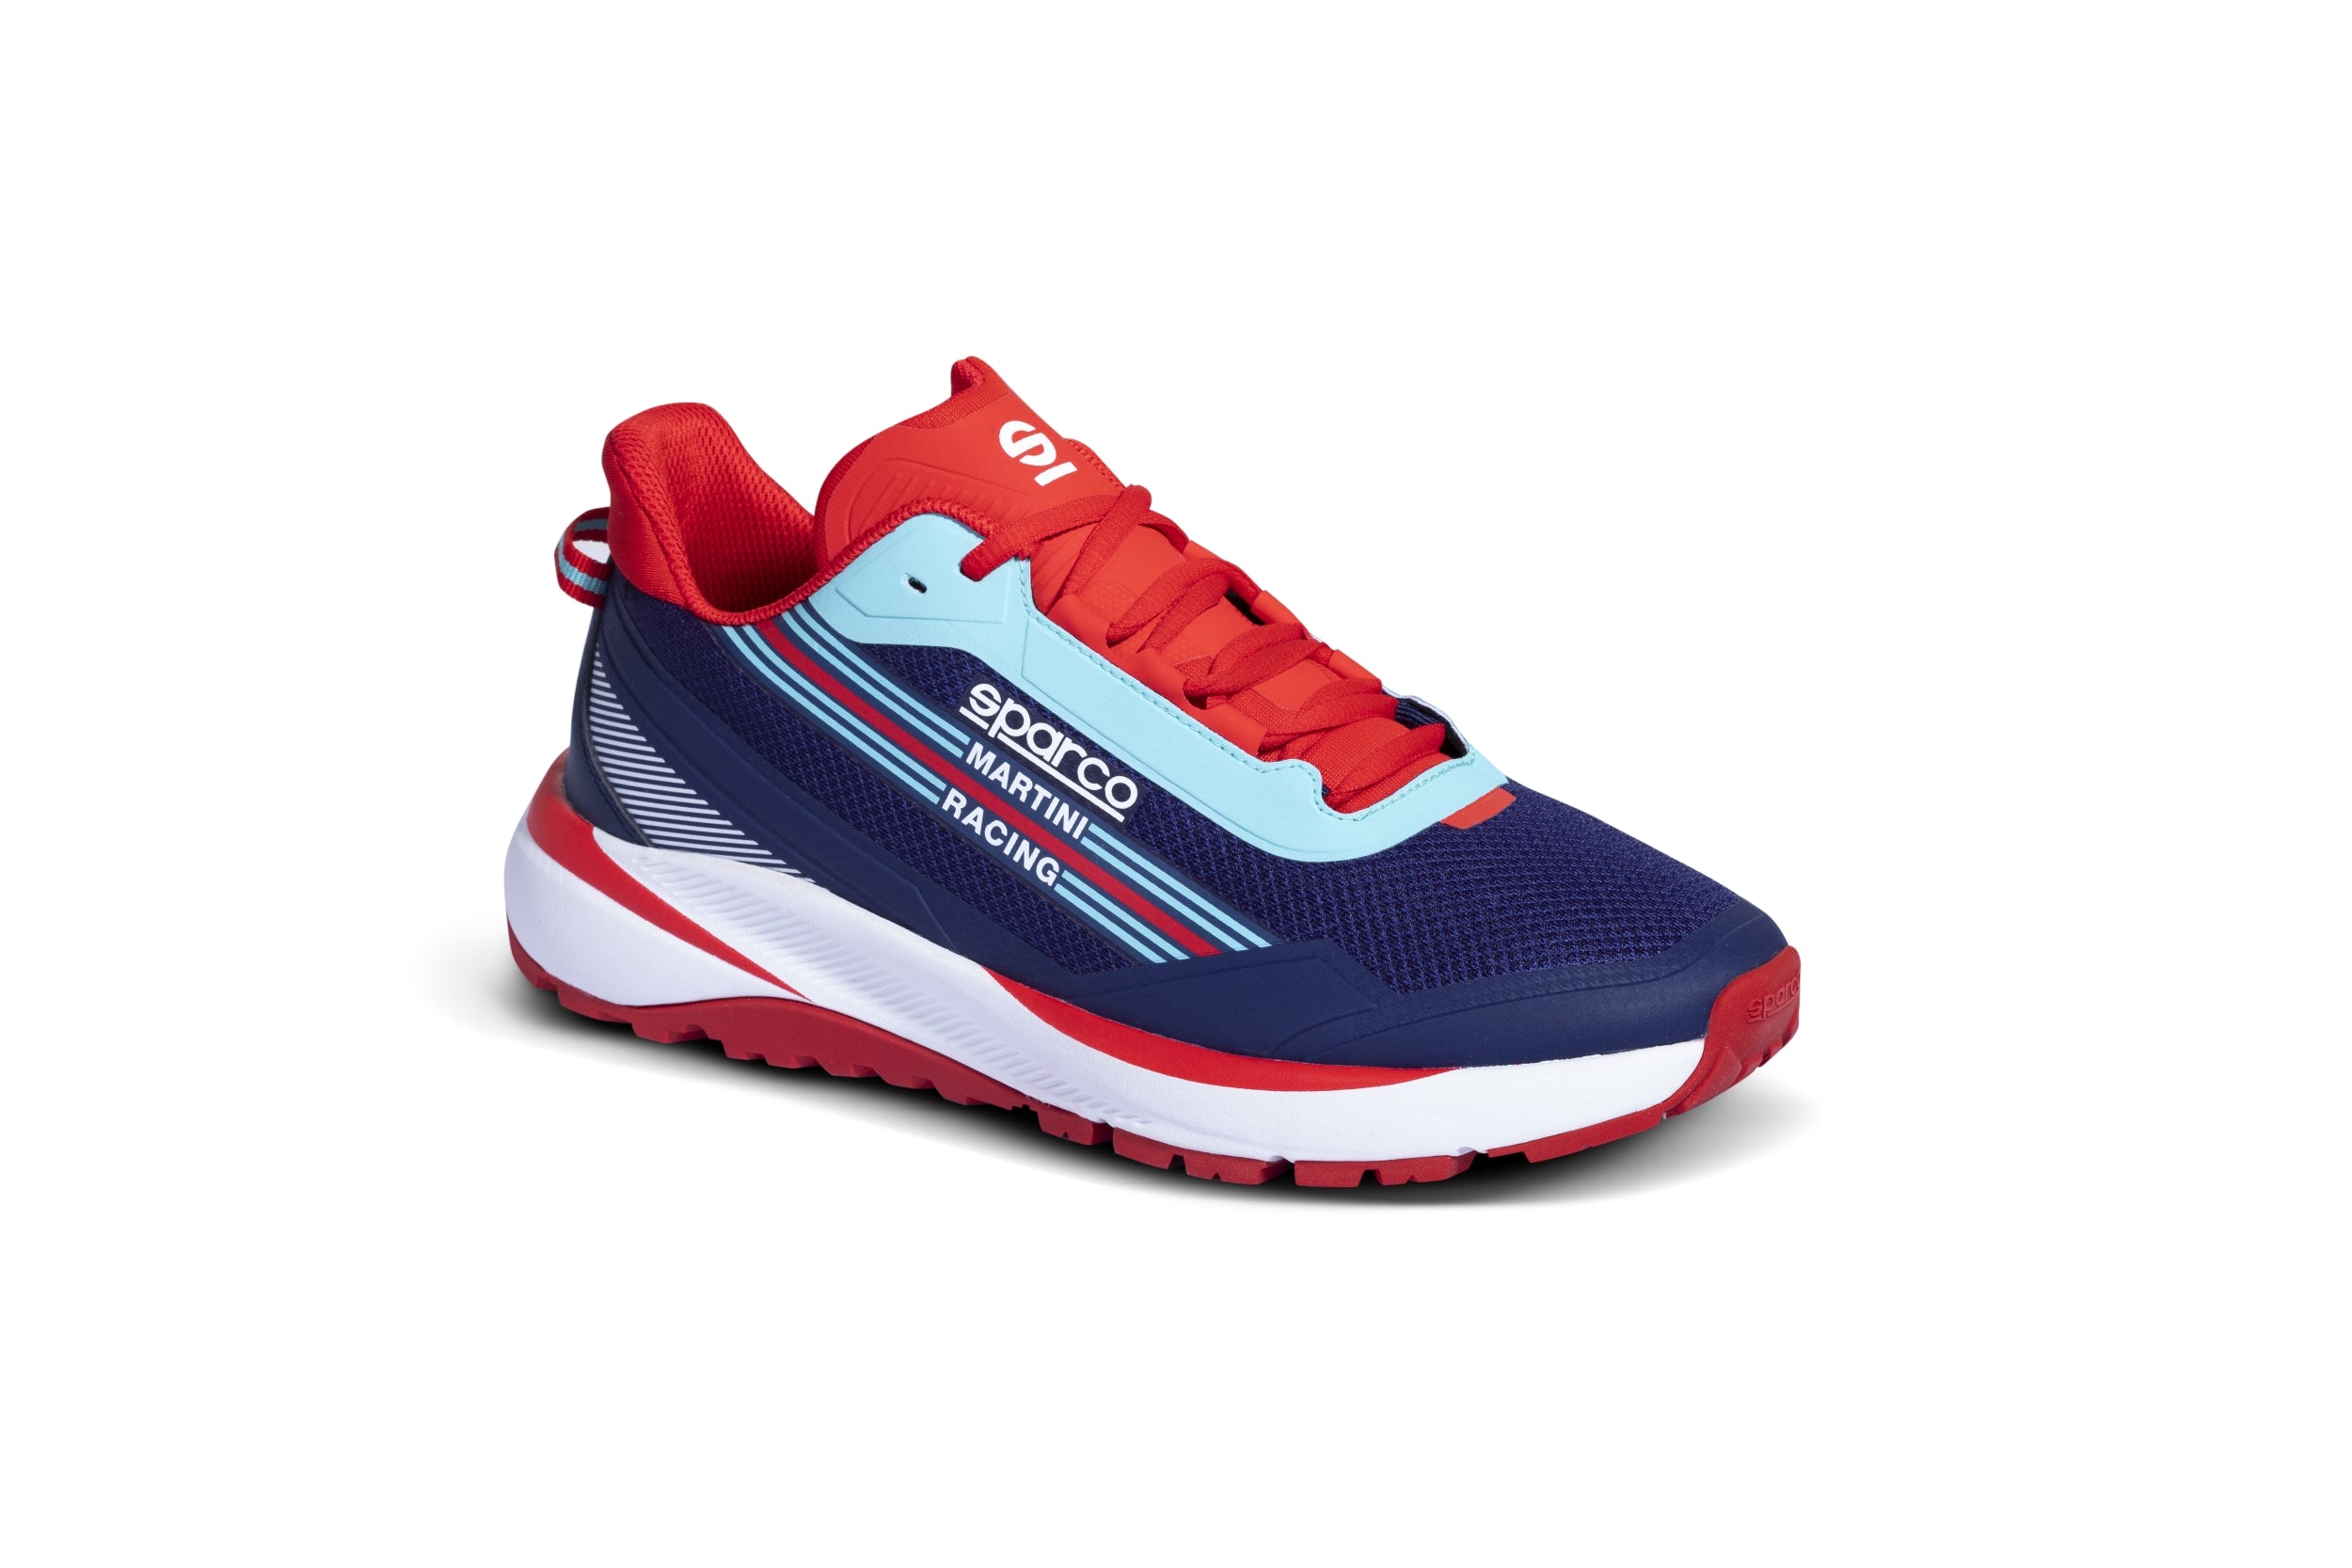 SPARCO 0012A5MR39BM S-RUN MARTINI RACING Sneakers Shoes, navy blue, size 39 Photo-0 